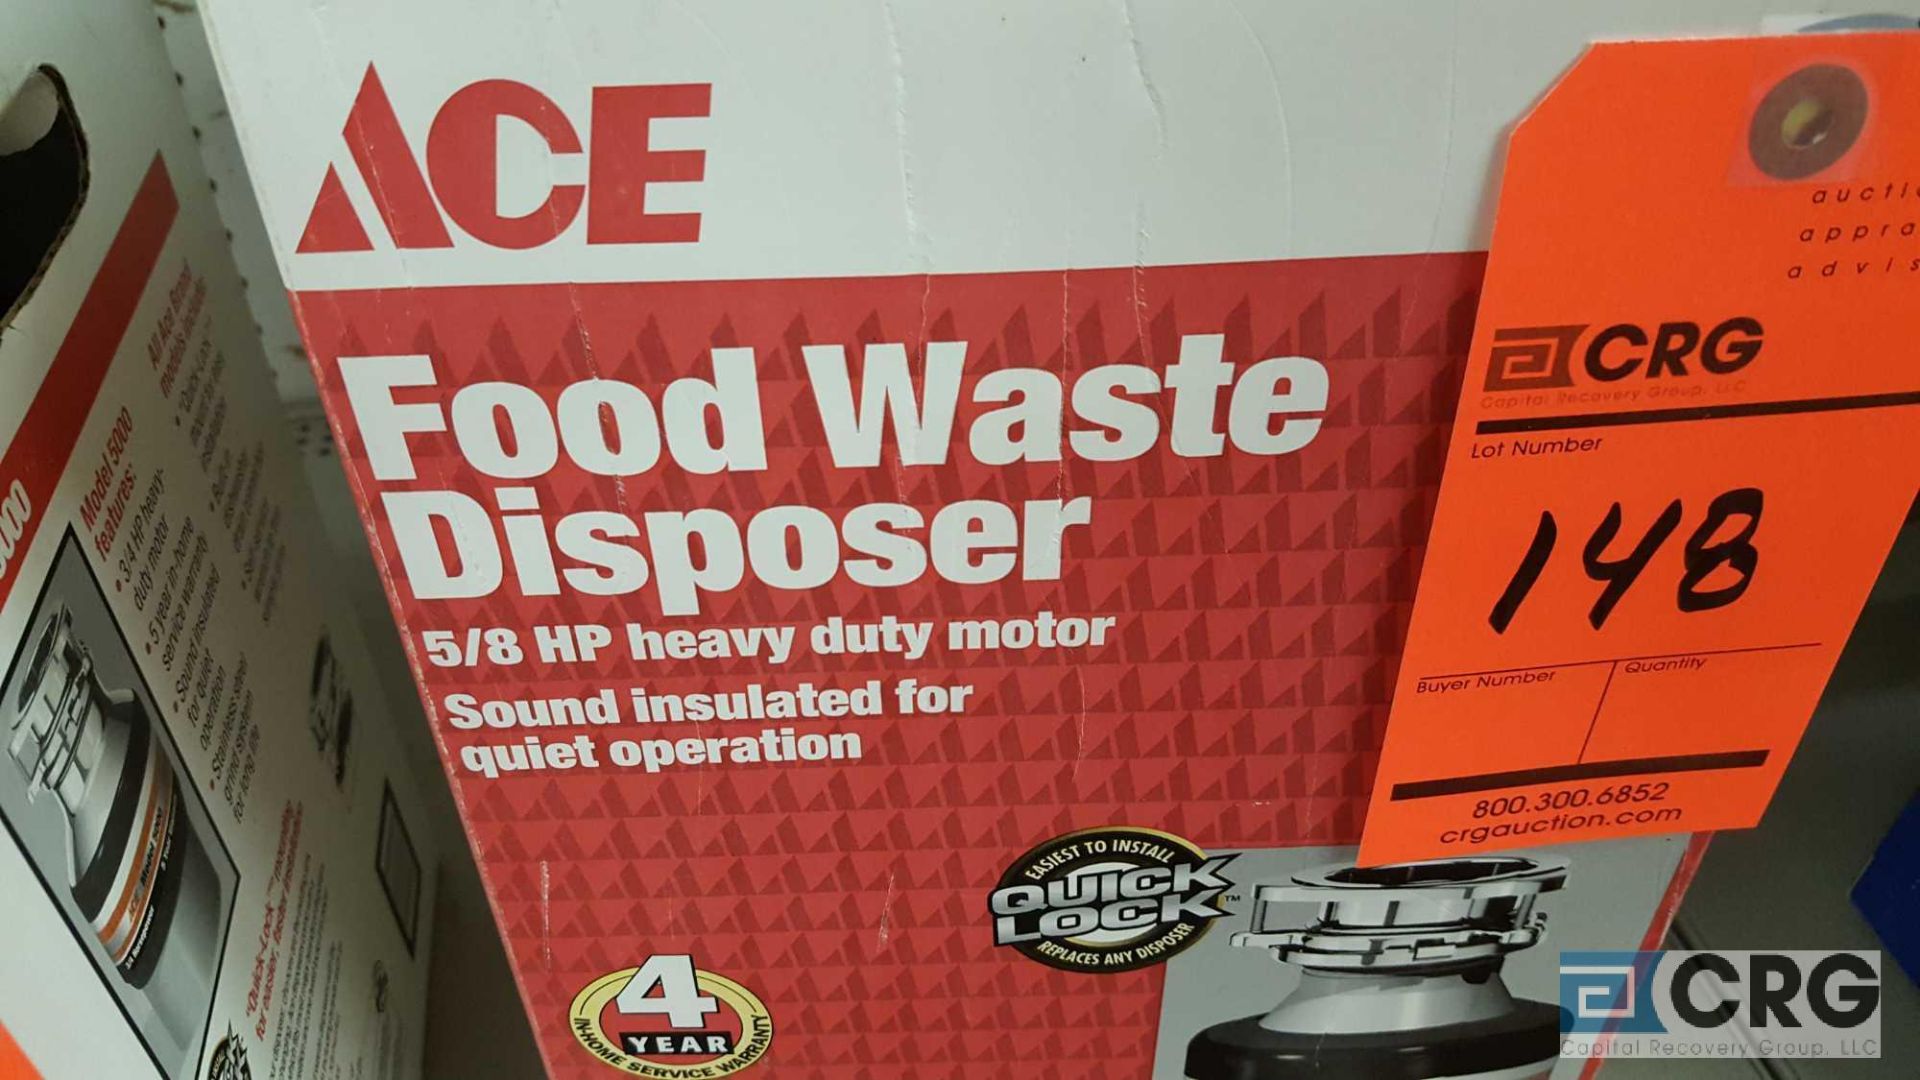 Ace 4000 food waste disposer, 5/8 HP, NEW - Image 2 of 2